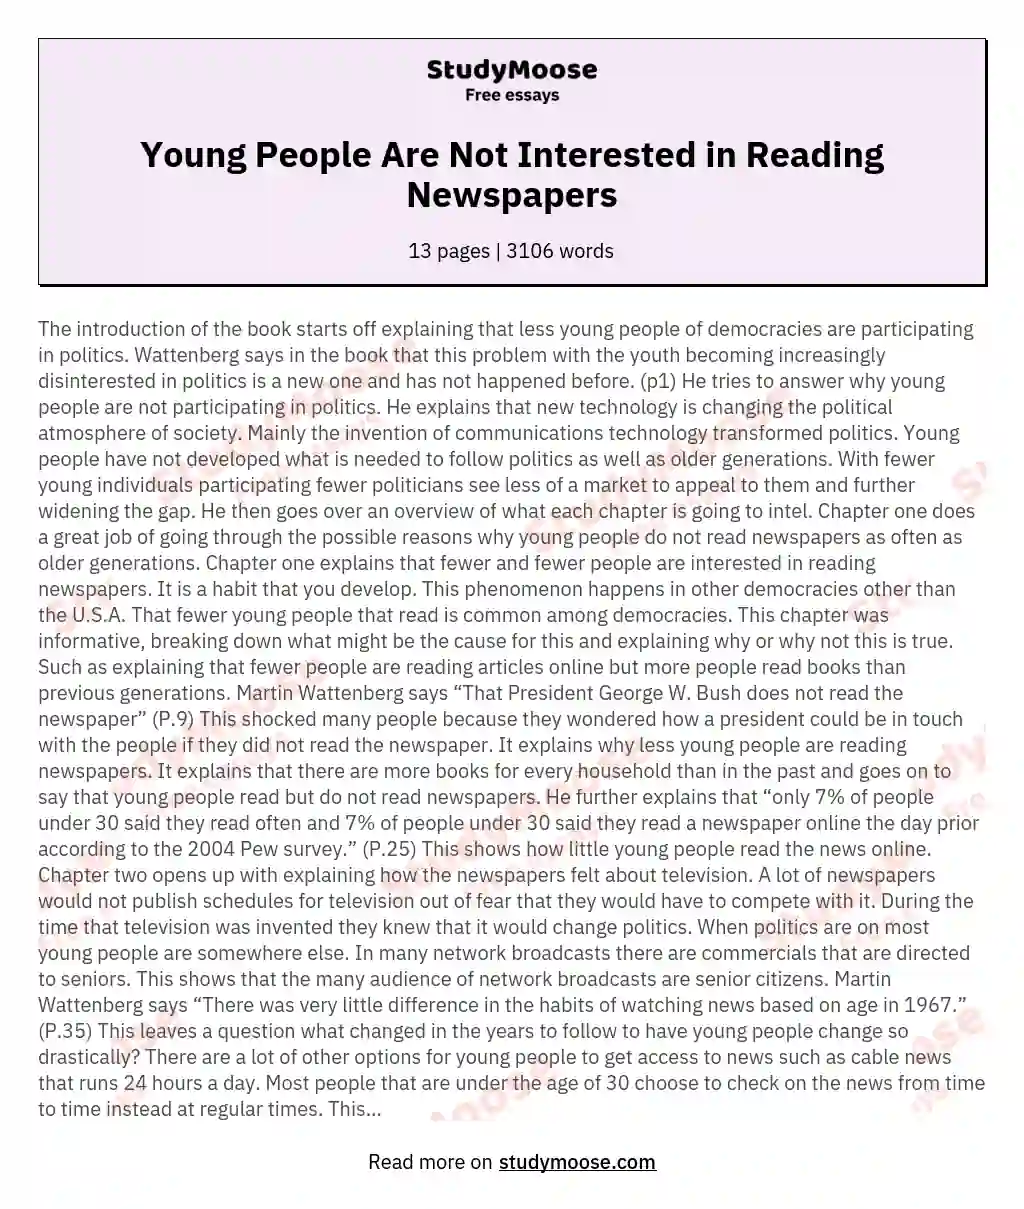 Young People Are Not Interested in Reading Newspapers essay